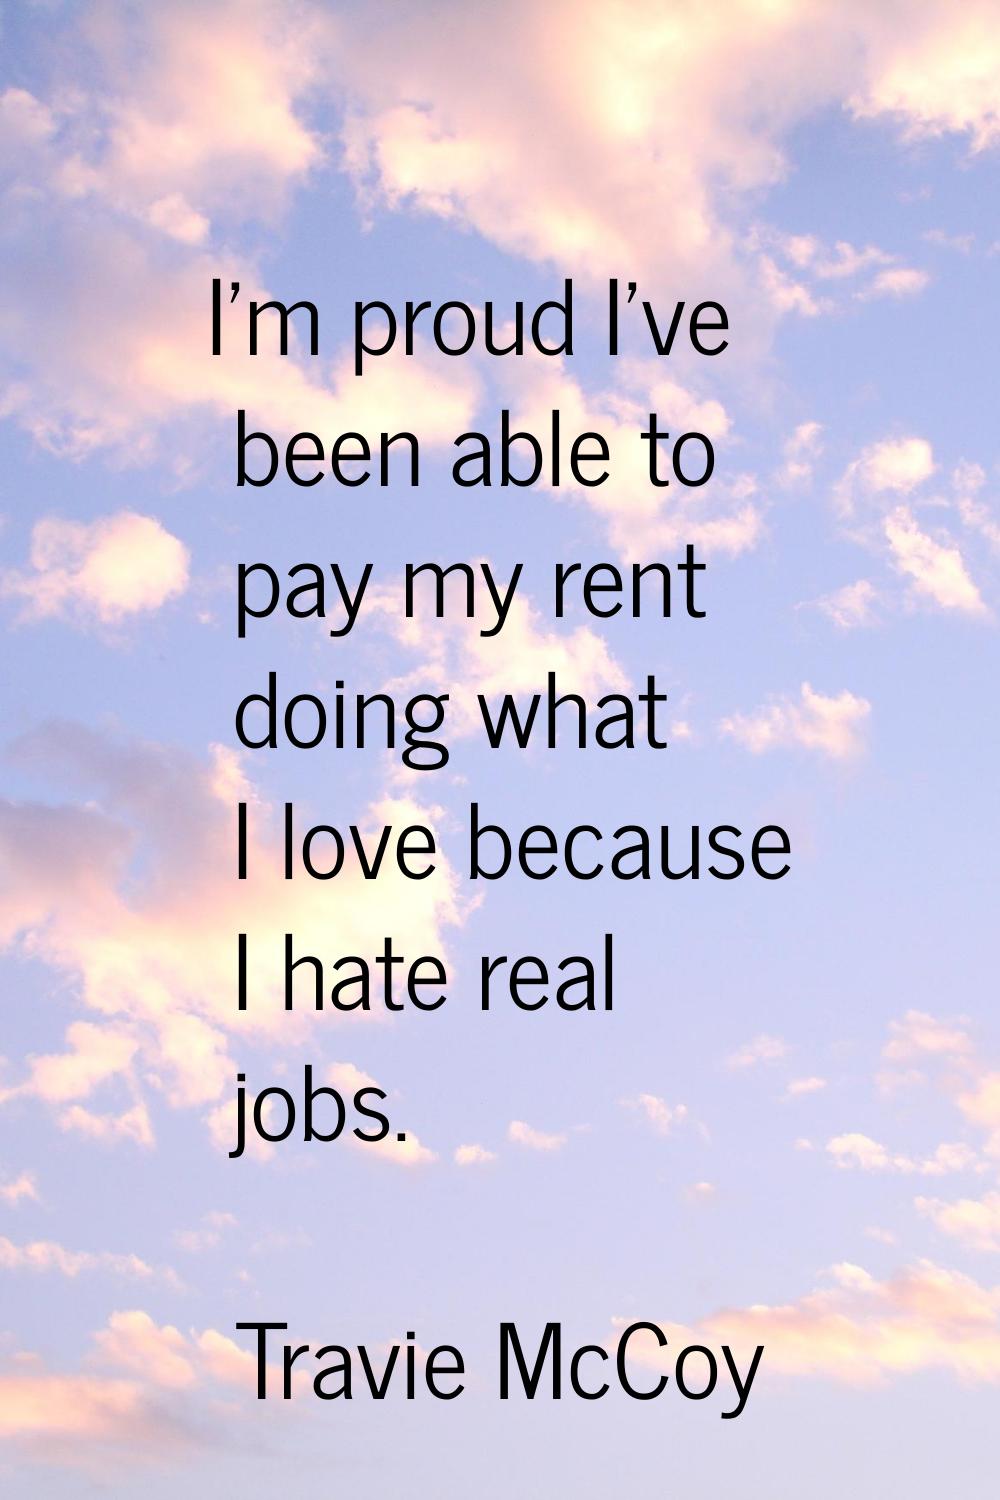 I'm proud I've been able to pay my rent doing what I love because I hate real jobs.